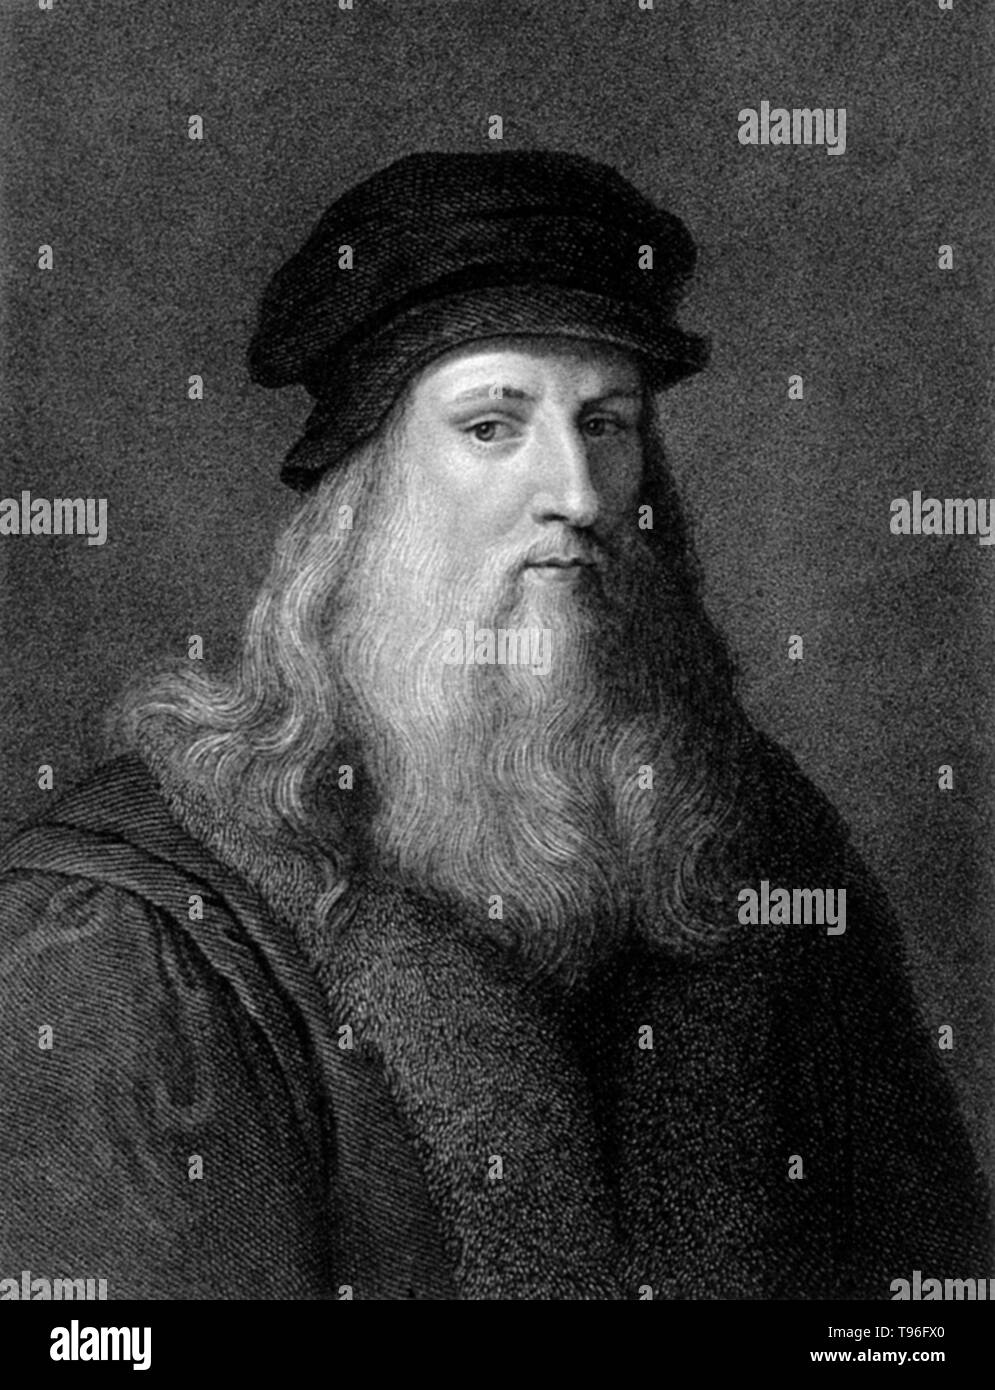 Leonardo di ser Piero da Vinci (April 15, 1452 - May 2, 1519) was an Italian Renaissance polymath: painter, sculptor, architect, musician, mathematician, engineer, inventor, anatomist, geologist, cartographer, botanist, and writer. His genius, perhaps more than that of any other figure, epitomized the Renaissance humanist ideal, often been described as the archetype of the Renaissance Man.. Line engraving by C. Warren, 1824. Stock Photo